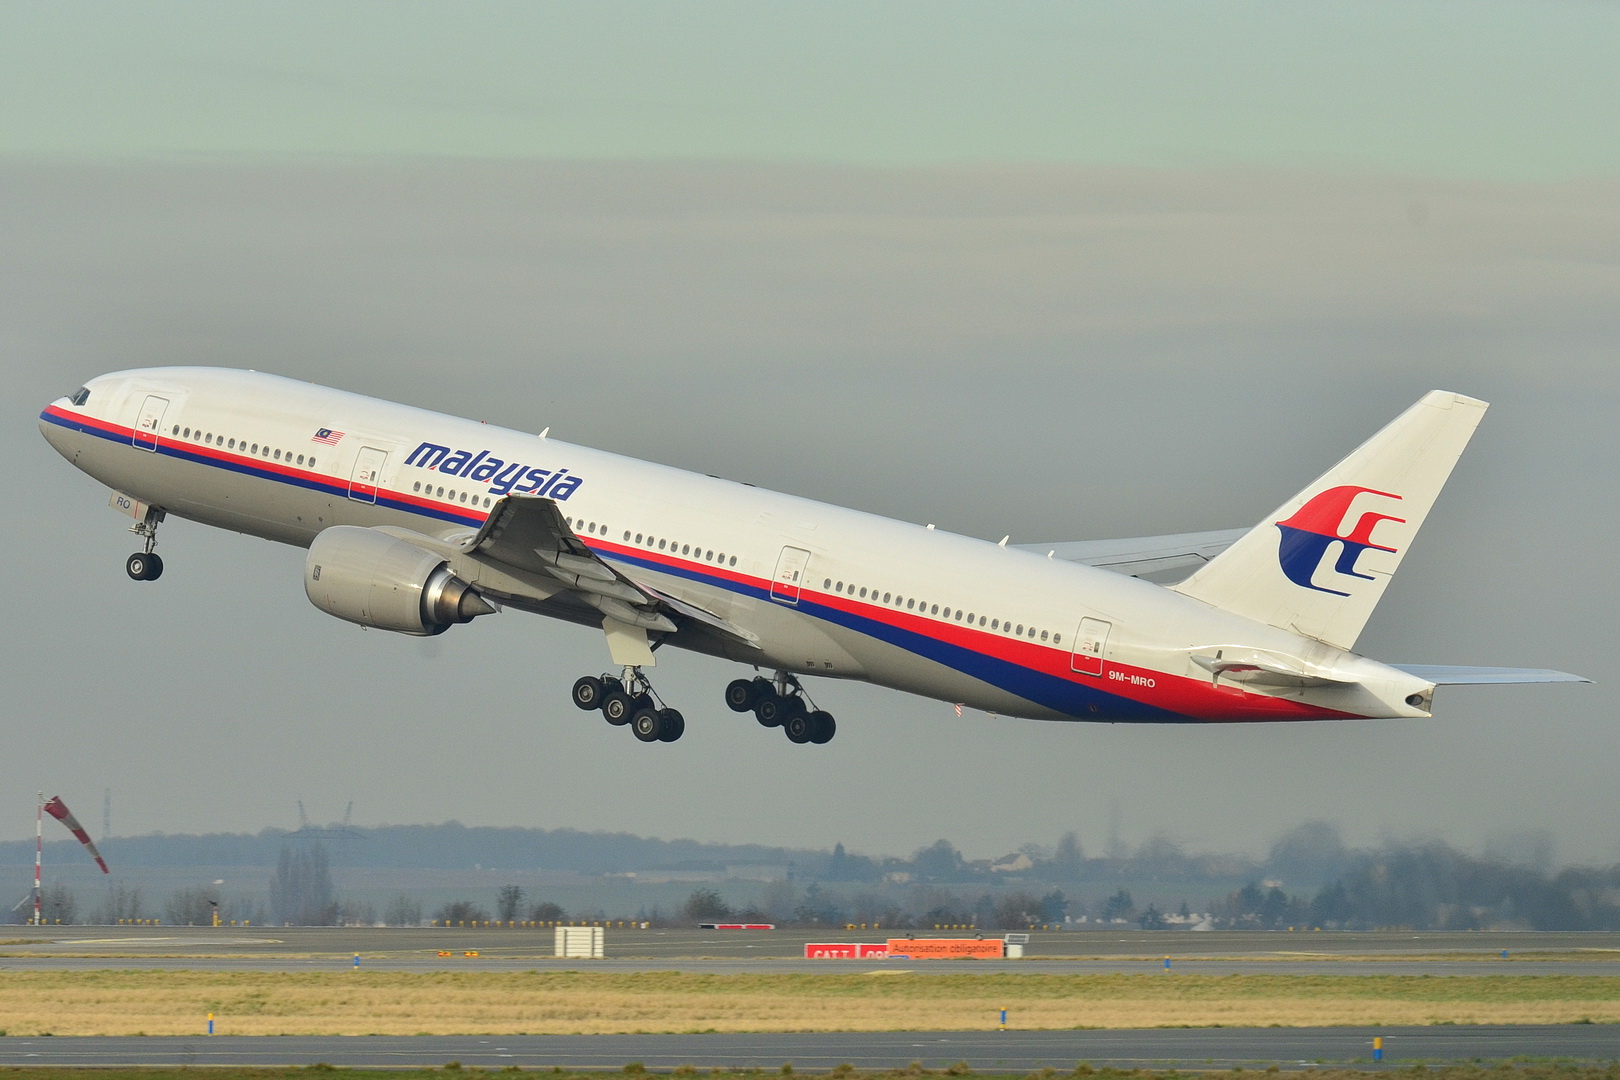 Malaysia Airlines launches new route from Kuala Lumpur to Doha